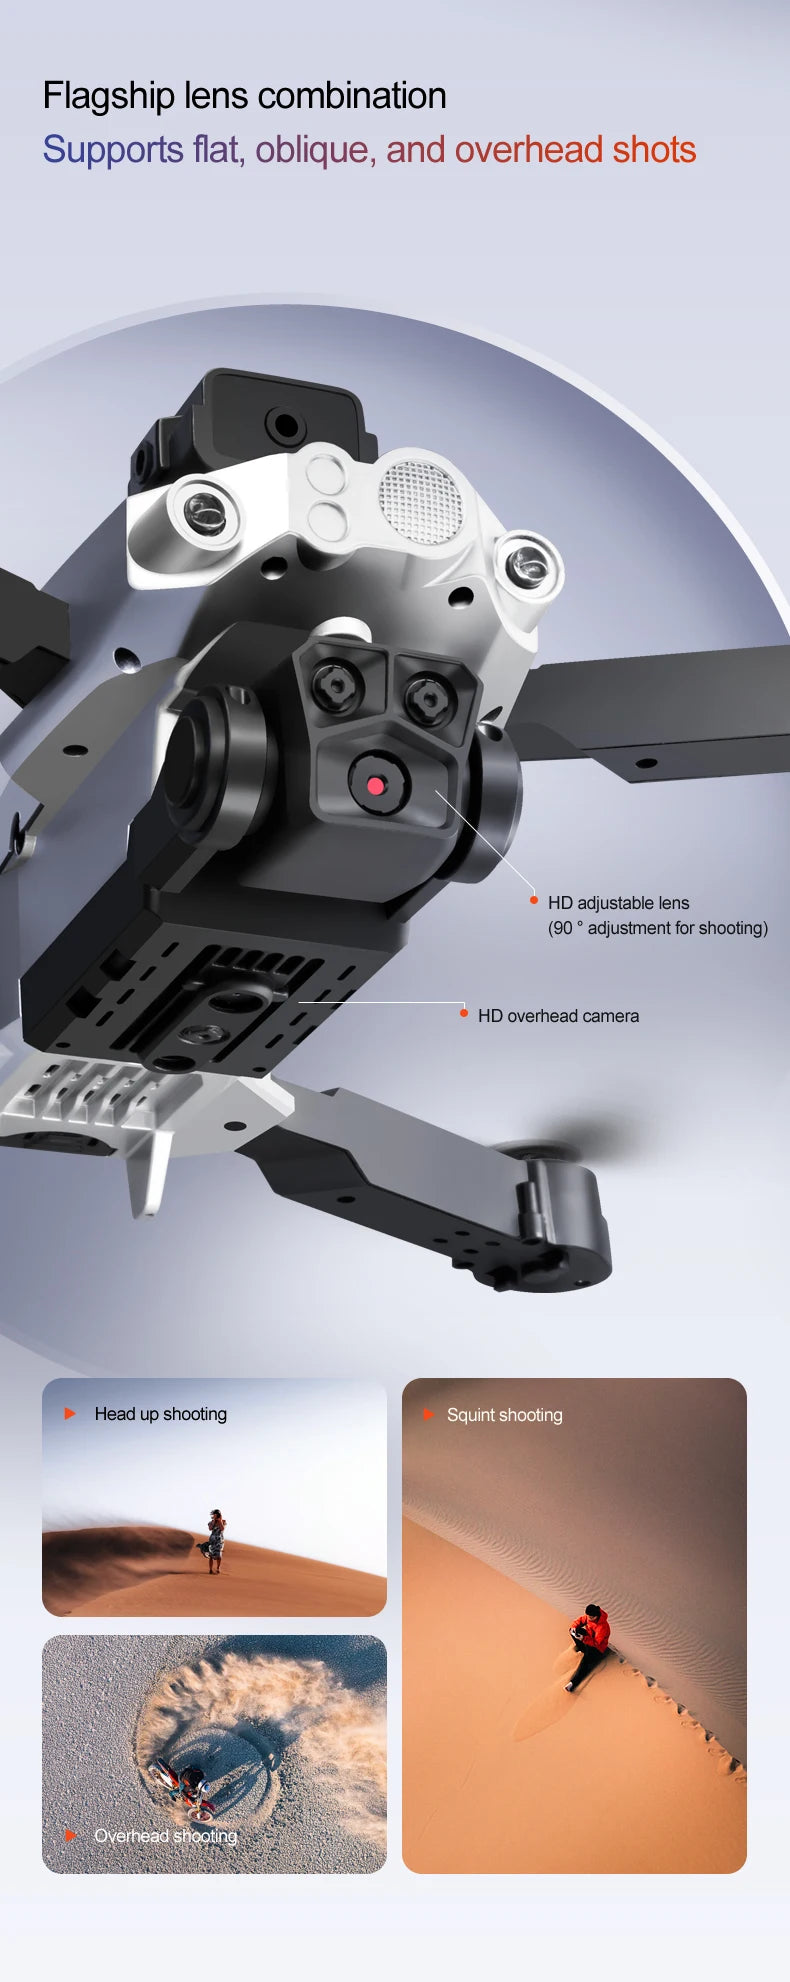 LU200 Drone, flagship lens combination supports flat; oblique, and overhead shots